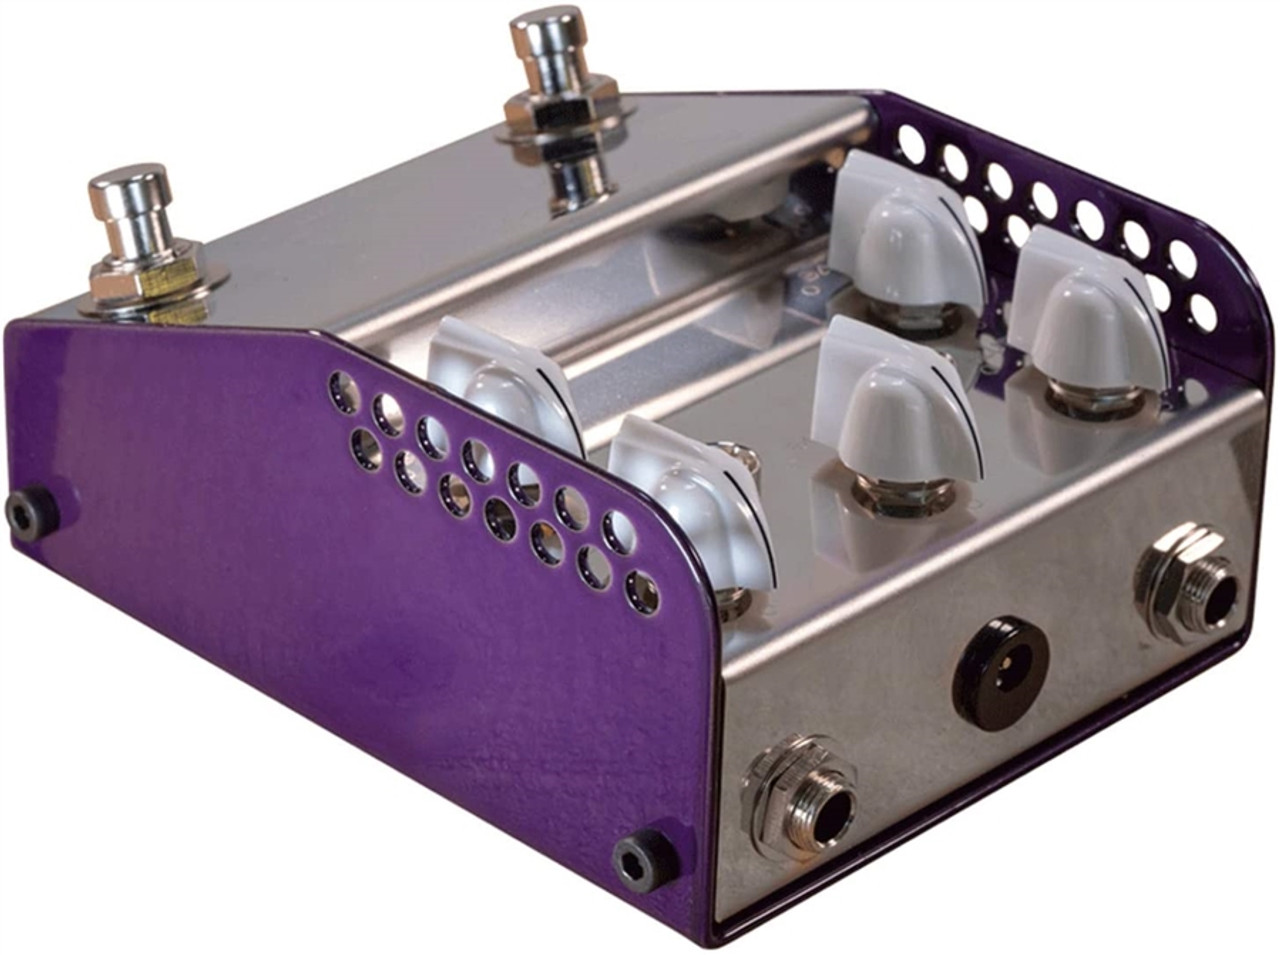 Thorpy FX THE DANE Overdrive and Boost pedal